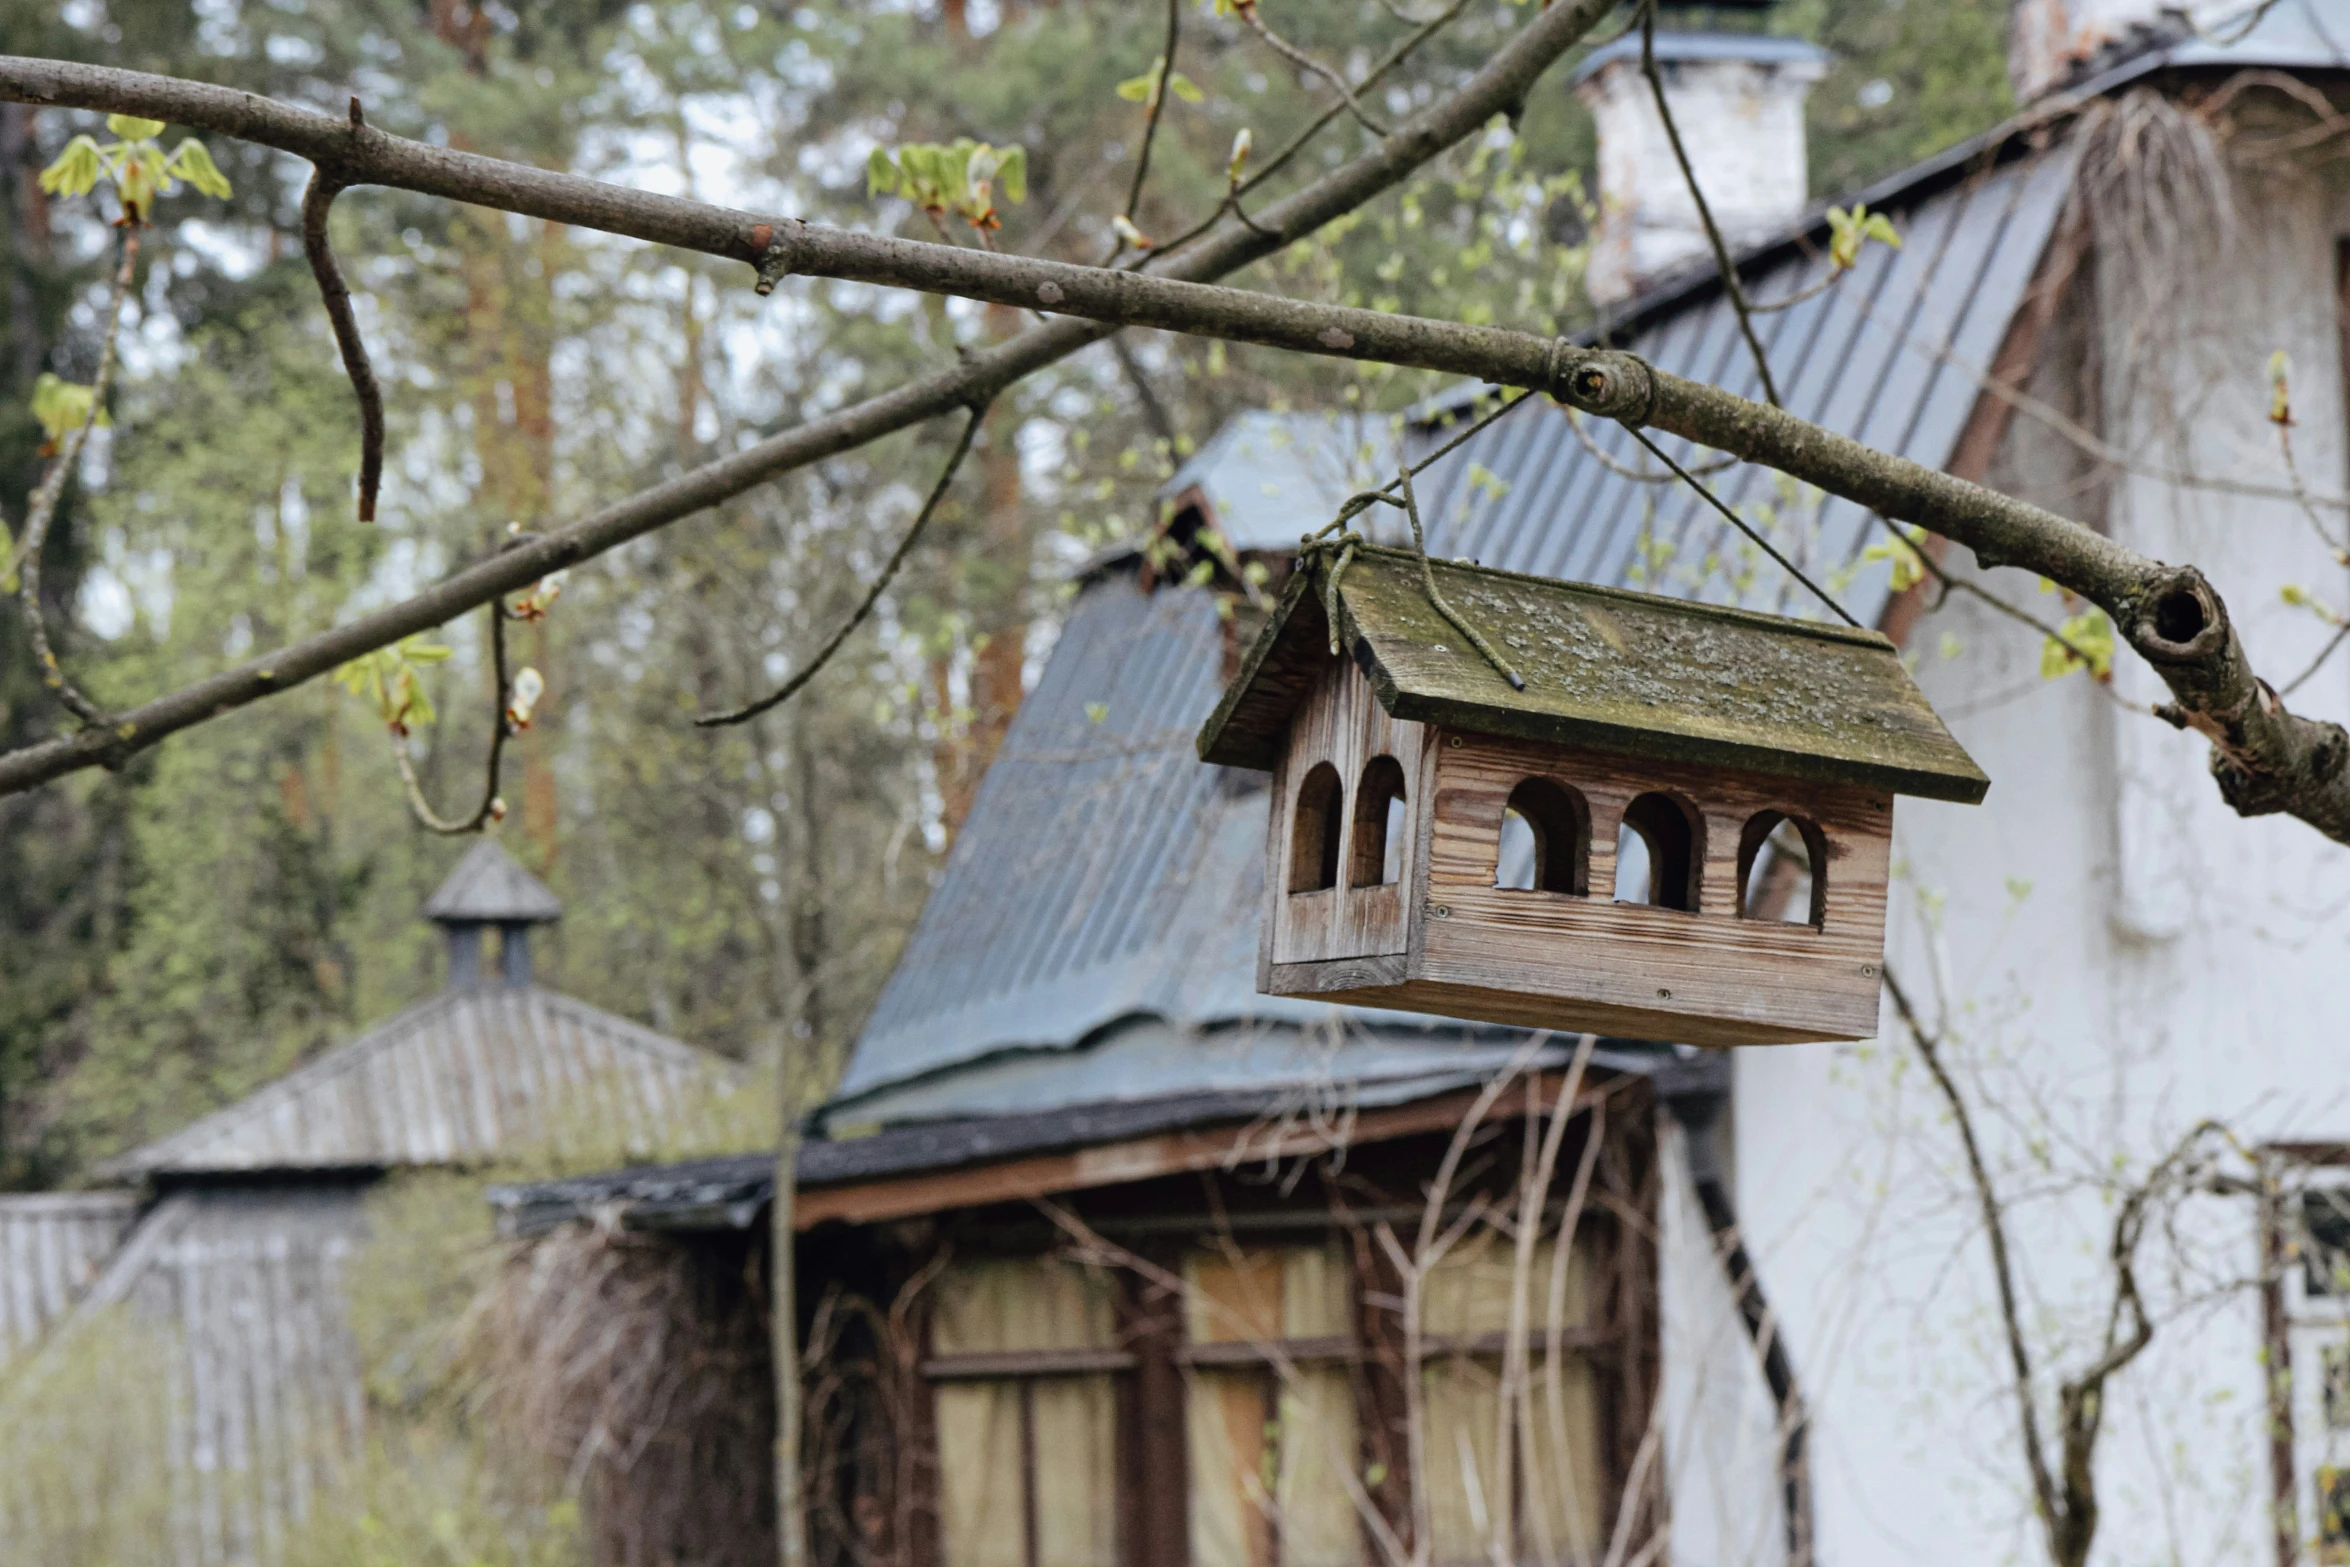 the wooden birdhouse is perched on the tree limb